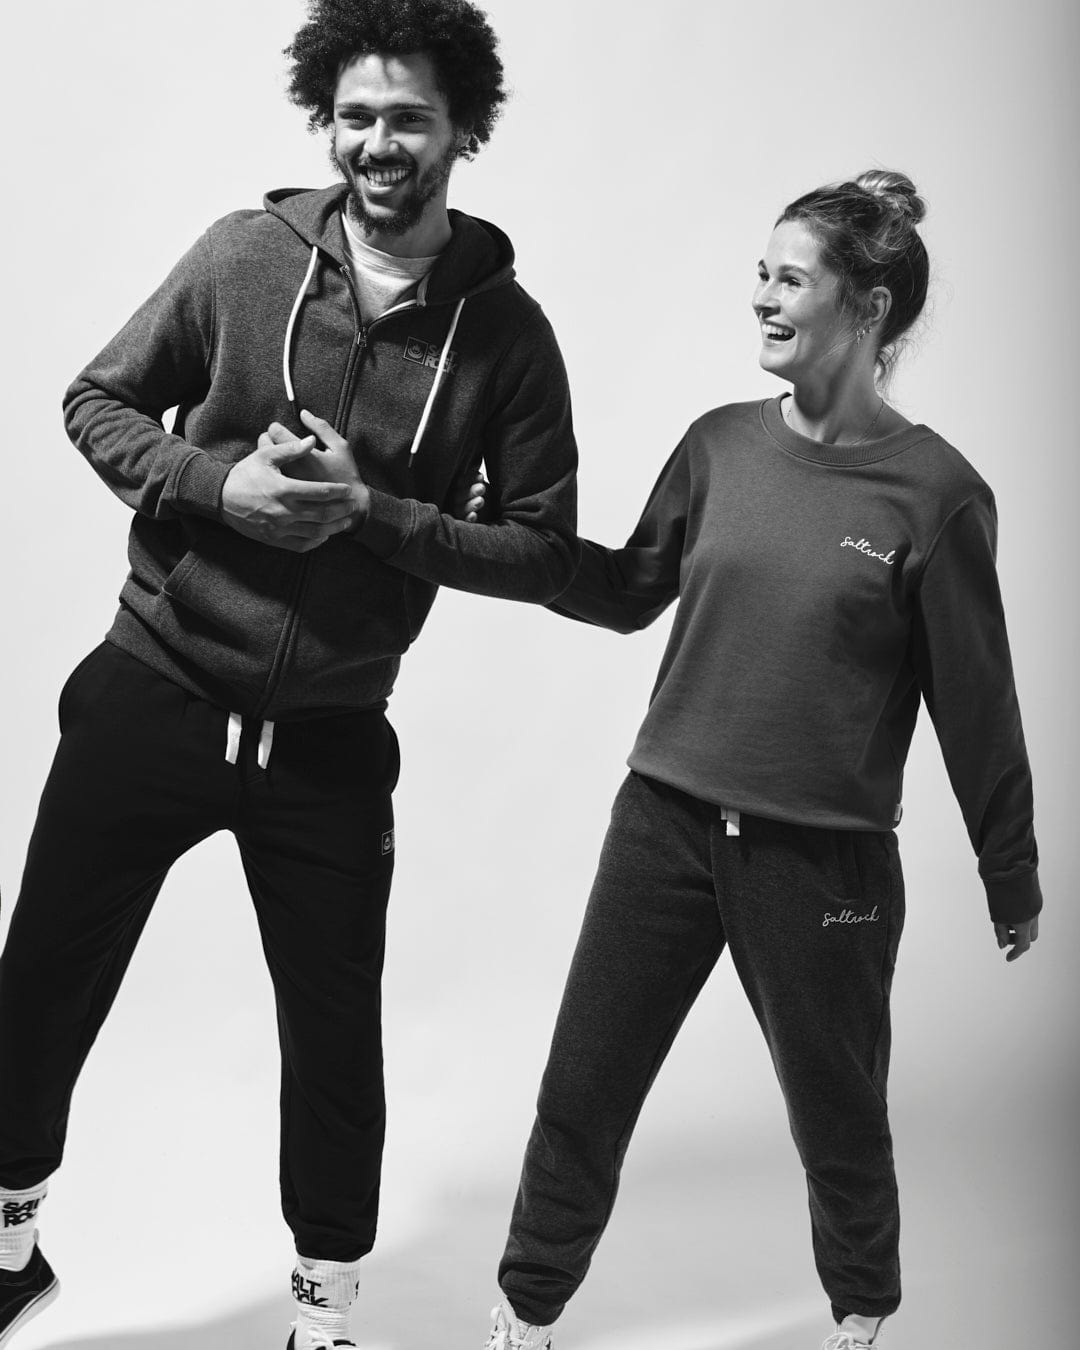 A black and white photo featuring a man and woman in Saltrock branding, posing for a photo in the Core Classic Range attire while wearing Saltrock's Velator - Womens Jogger - Navy.